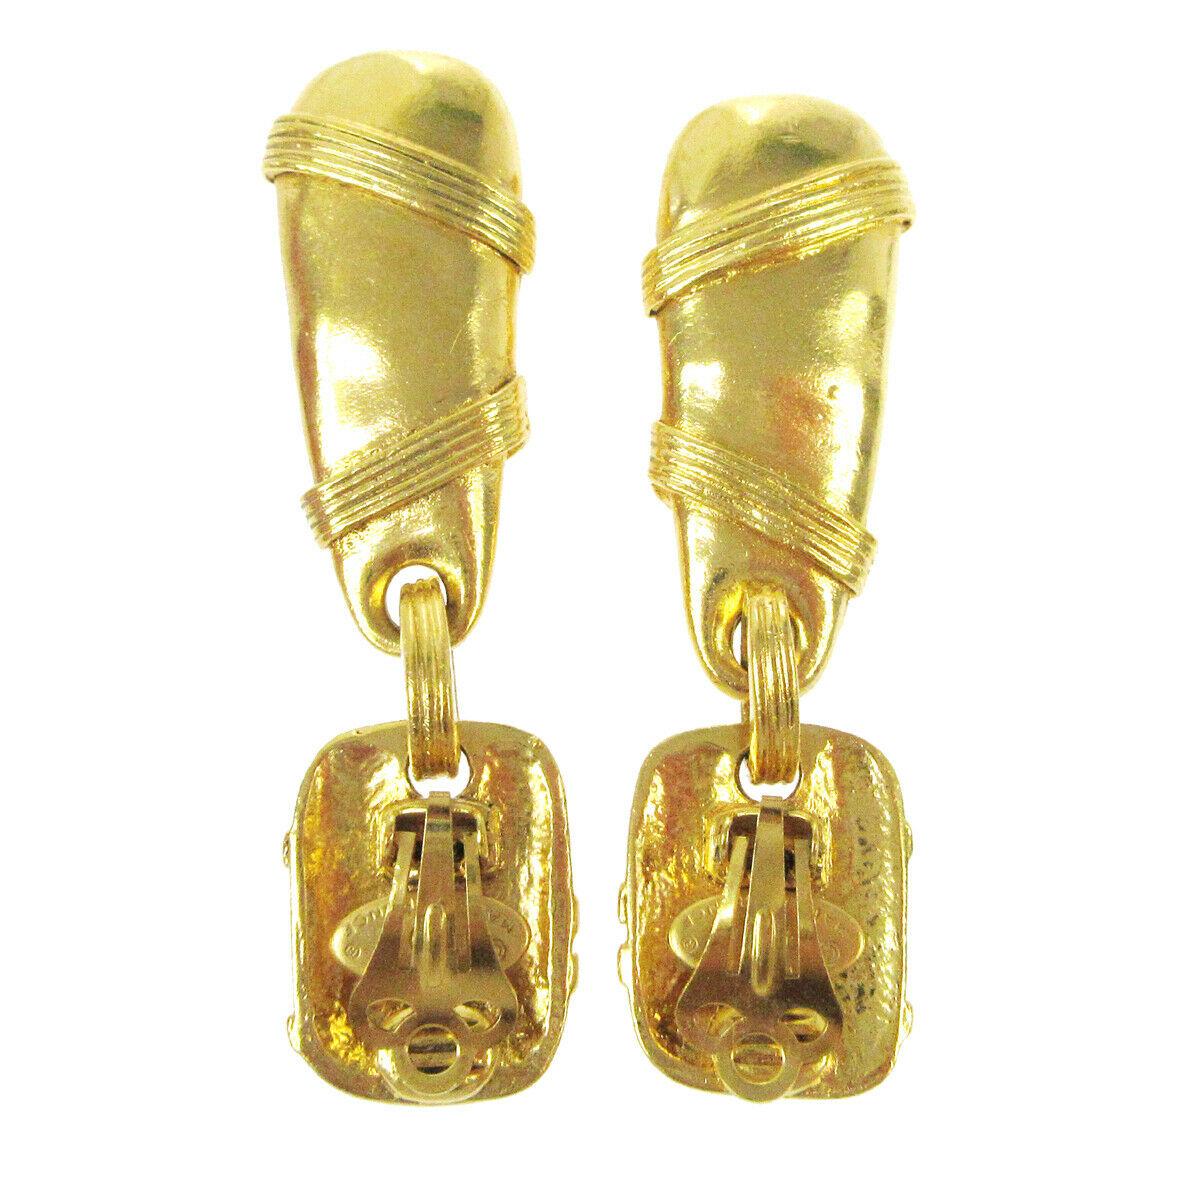 Chanel Gold Charm CC Textured Dangle Drop Evening Earrings in Box

Metal
Gold tone hardware
Clip on
Made in France
Width 0.75